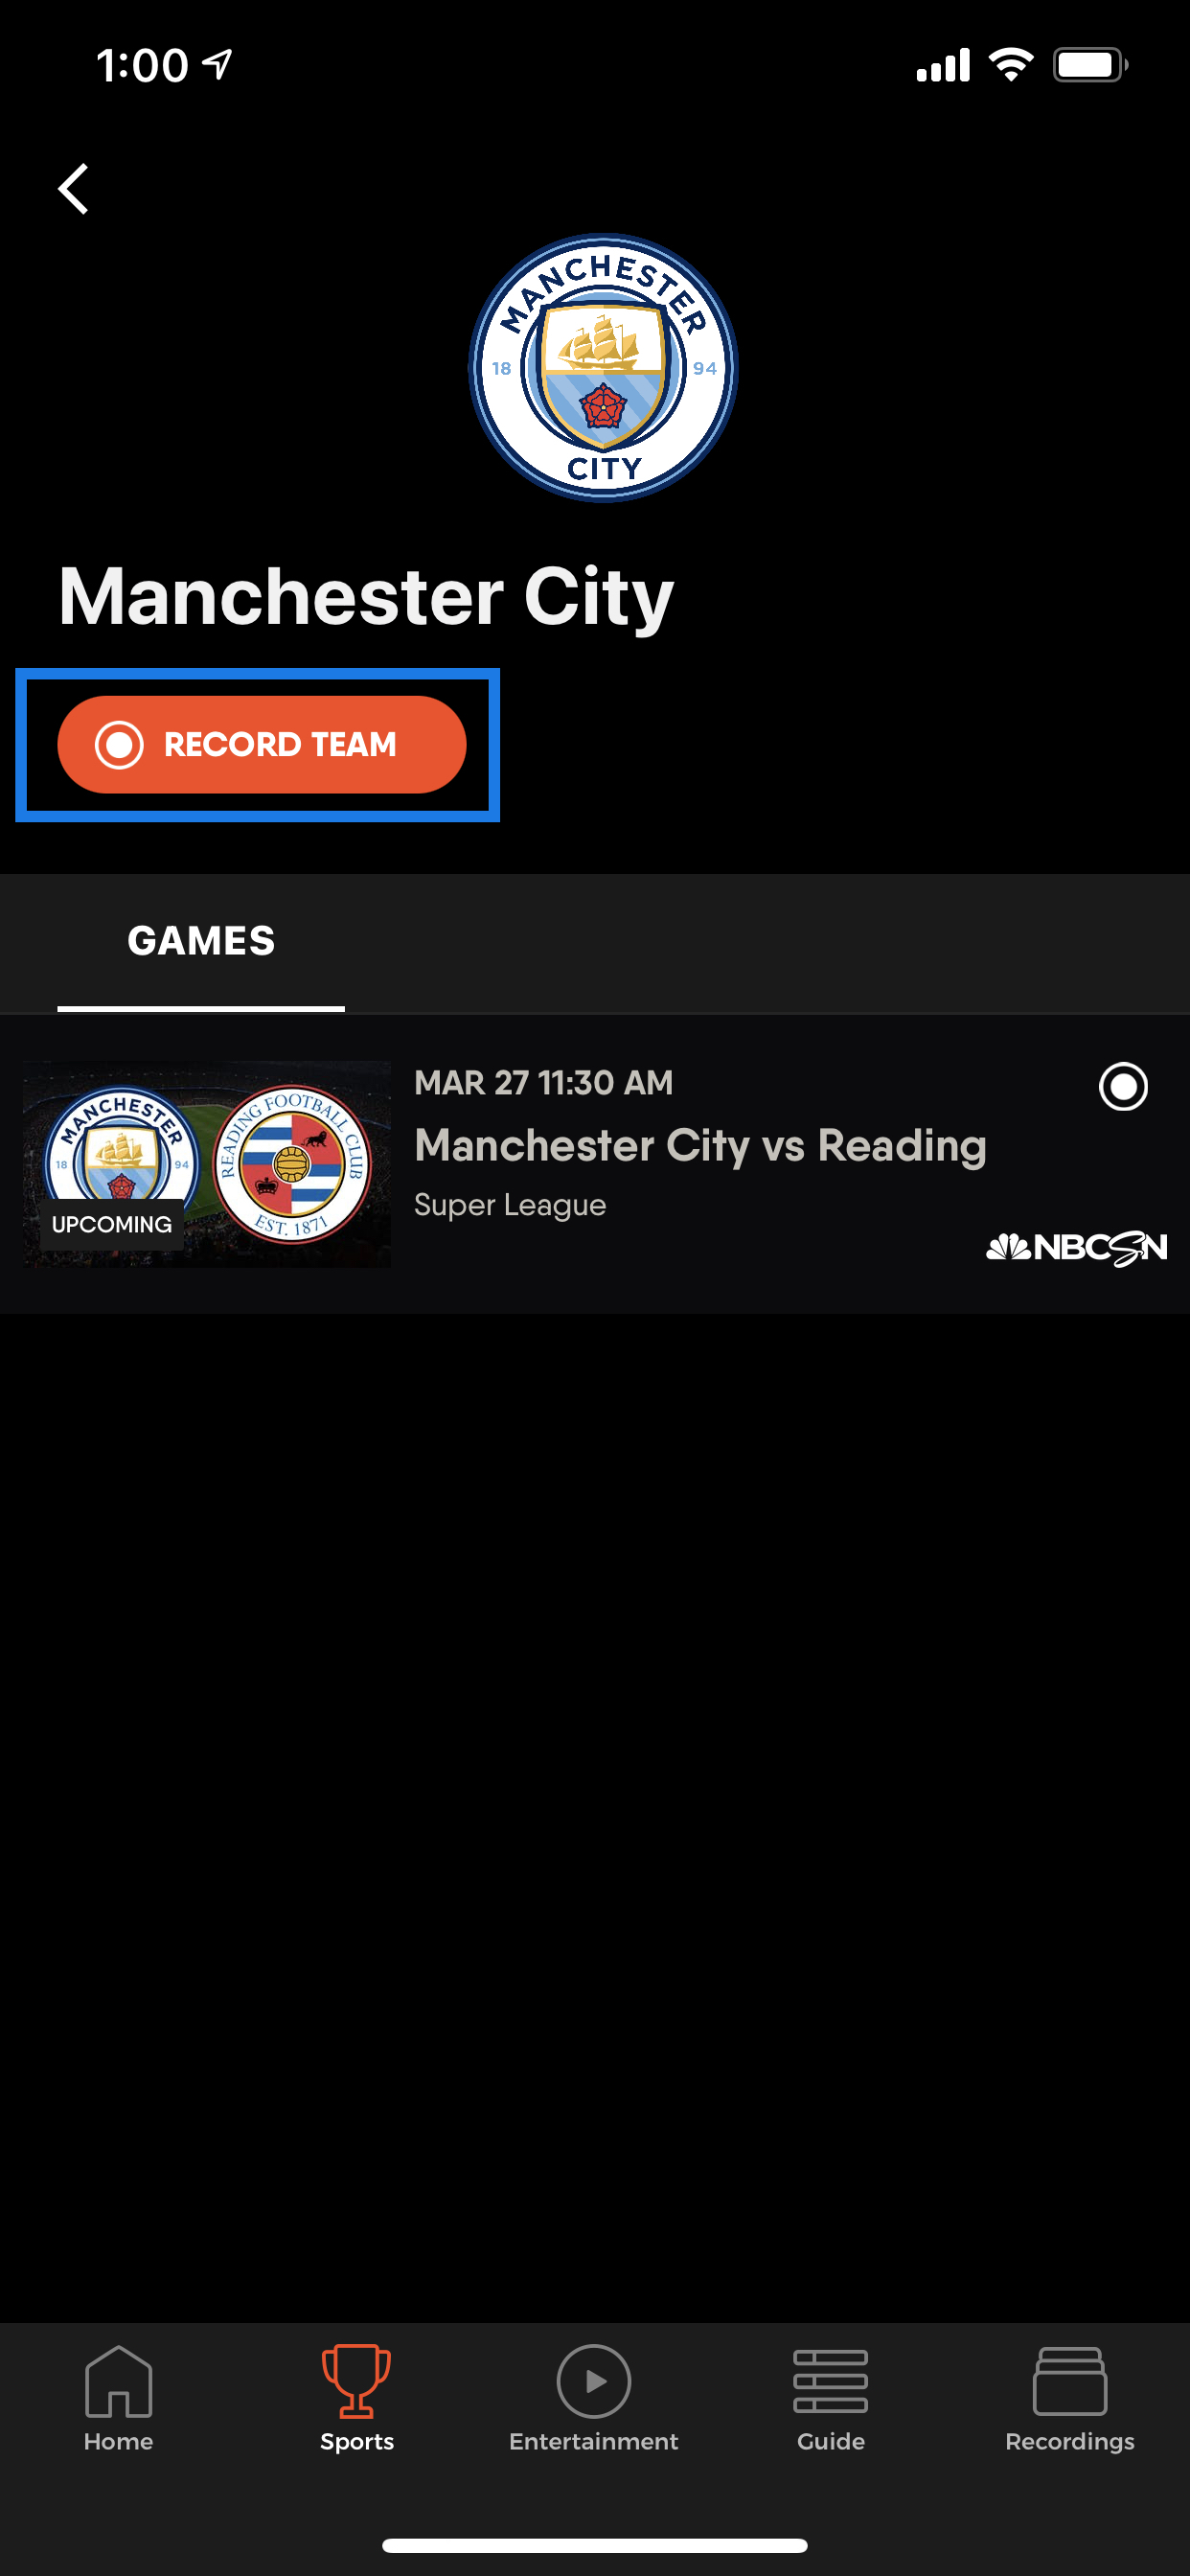 TEAM INFO screen for Manchester City on the FuboTV app for iOS with RECORD TEAM option highlighted